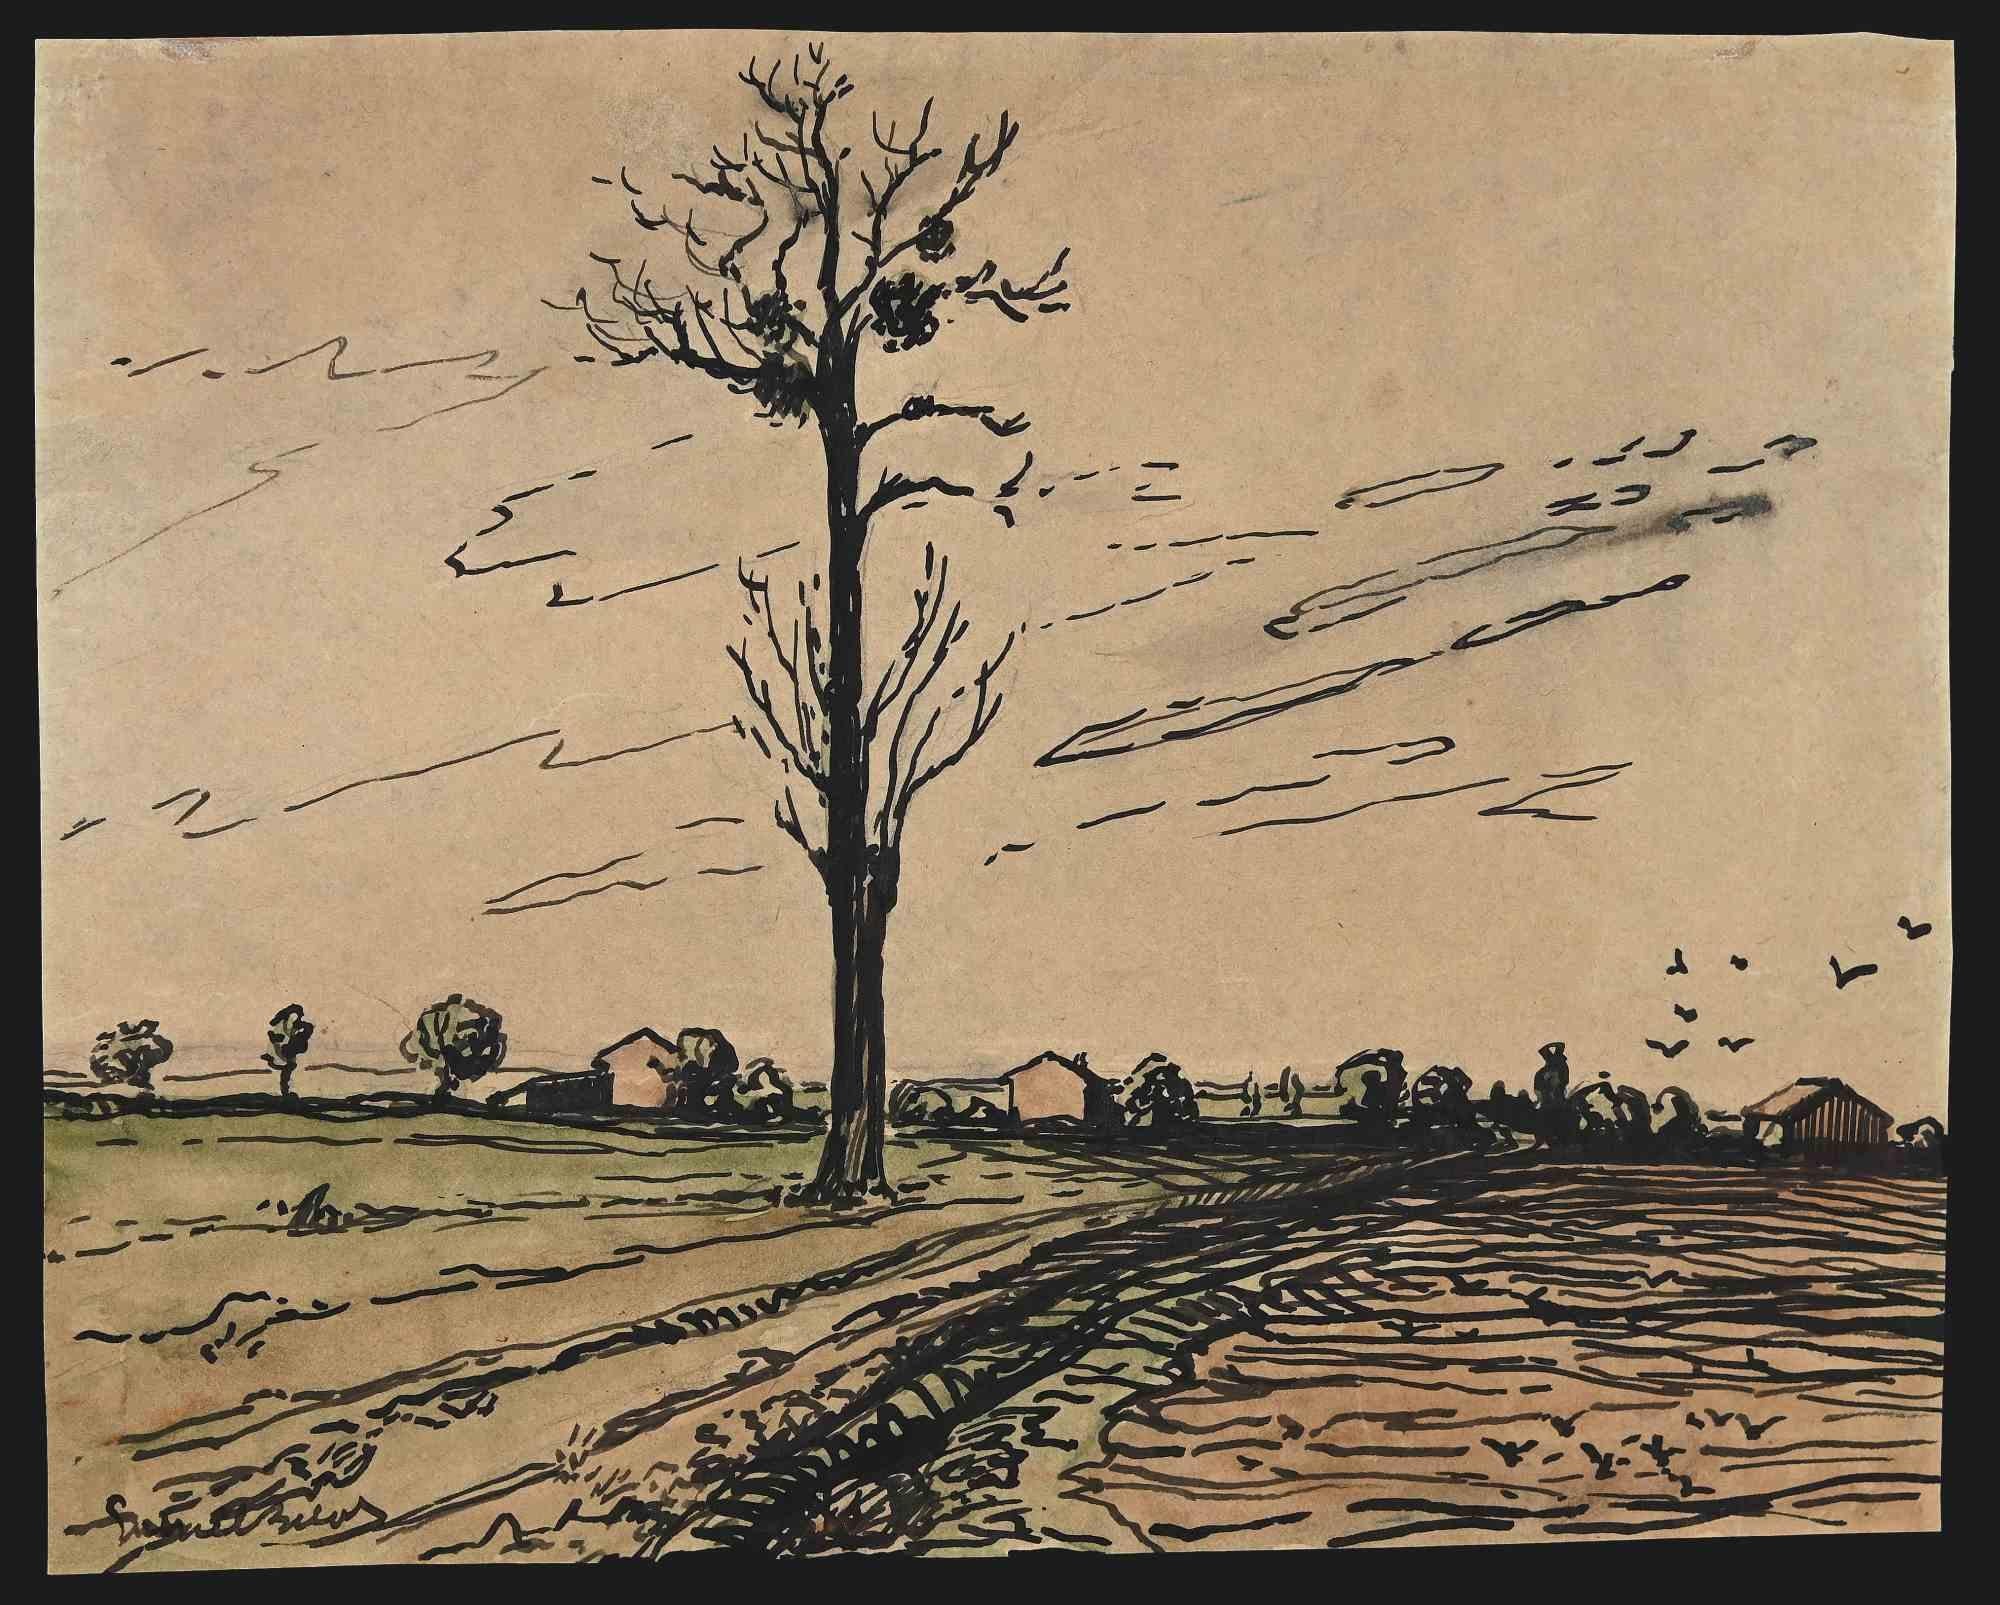 Unknown Figurative Art - French Countryside - Original China Ink Drawing and Watercolor - 1940s